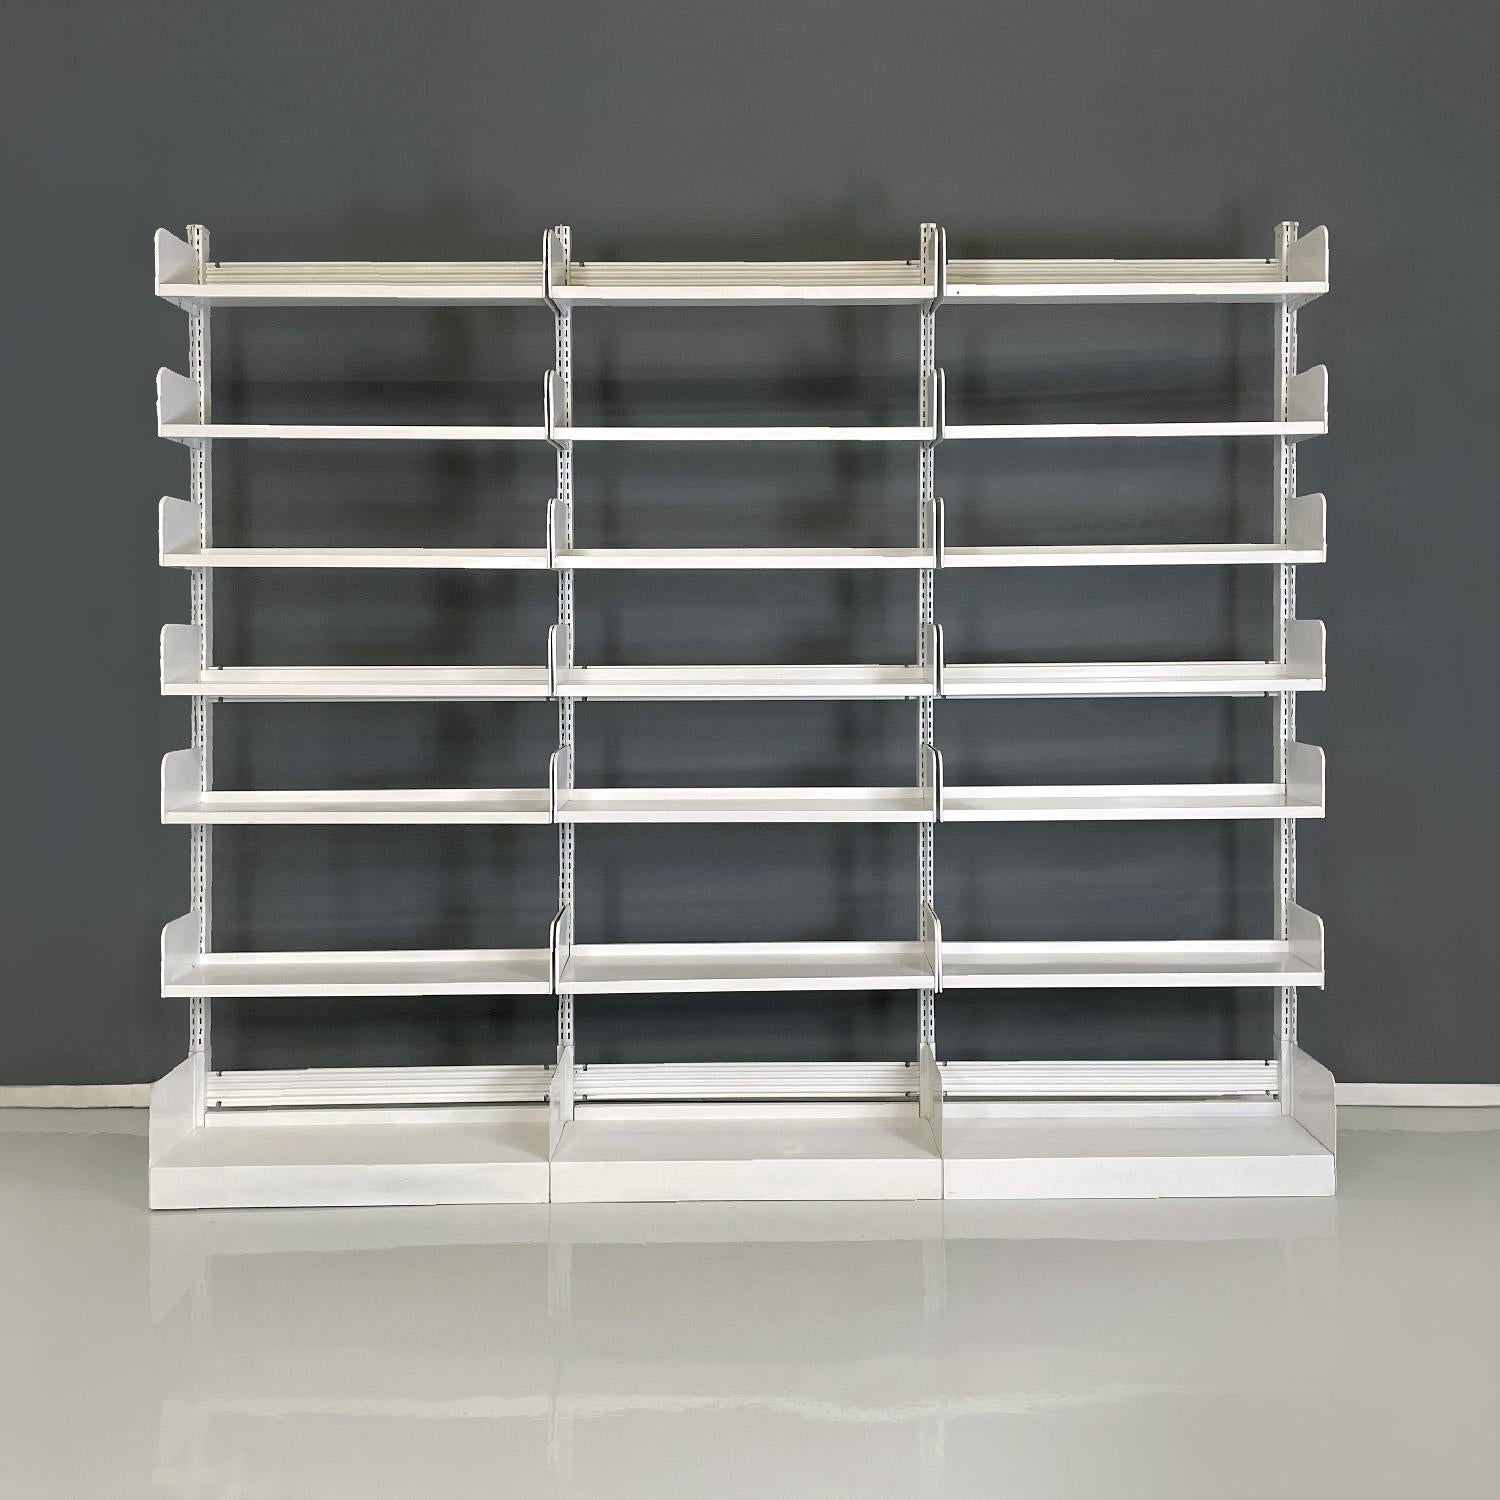 Italian mid-century modern white modular bookcase Congresso by Lips Vago, 1960s
Modular bookcase mod. Congresso with the structure entirely in white metal, original of the time, composed of four uprights, of which the central ones are double